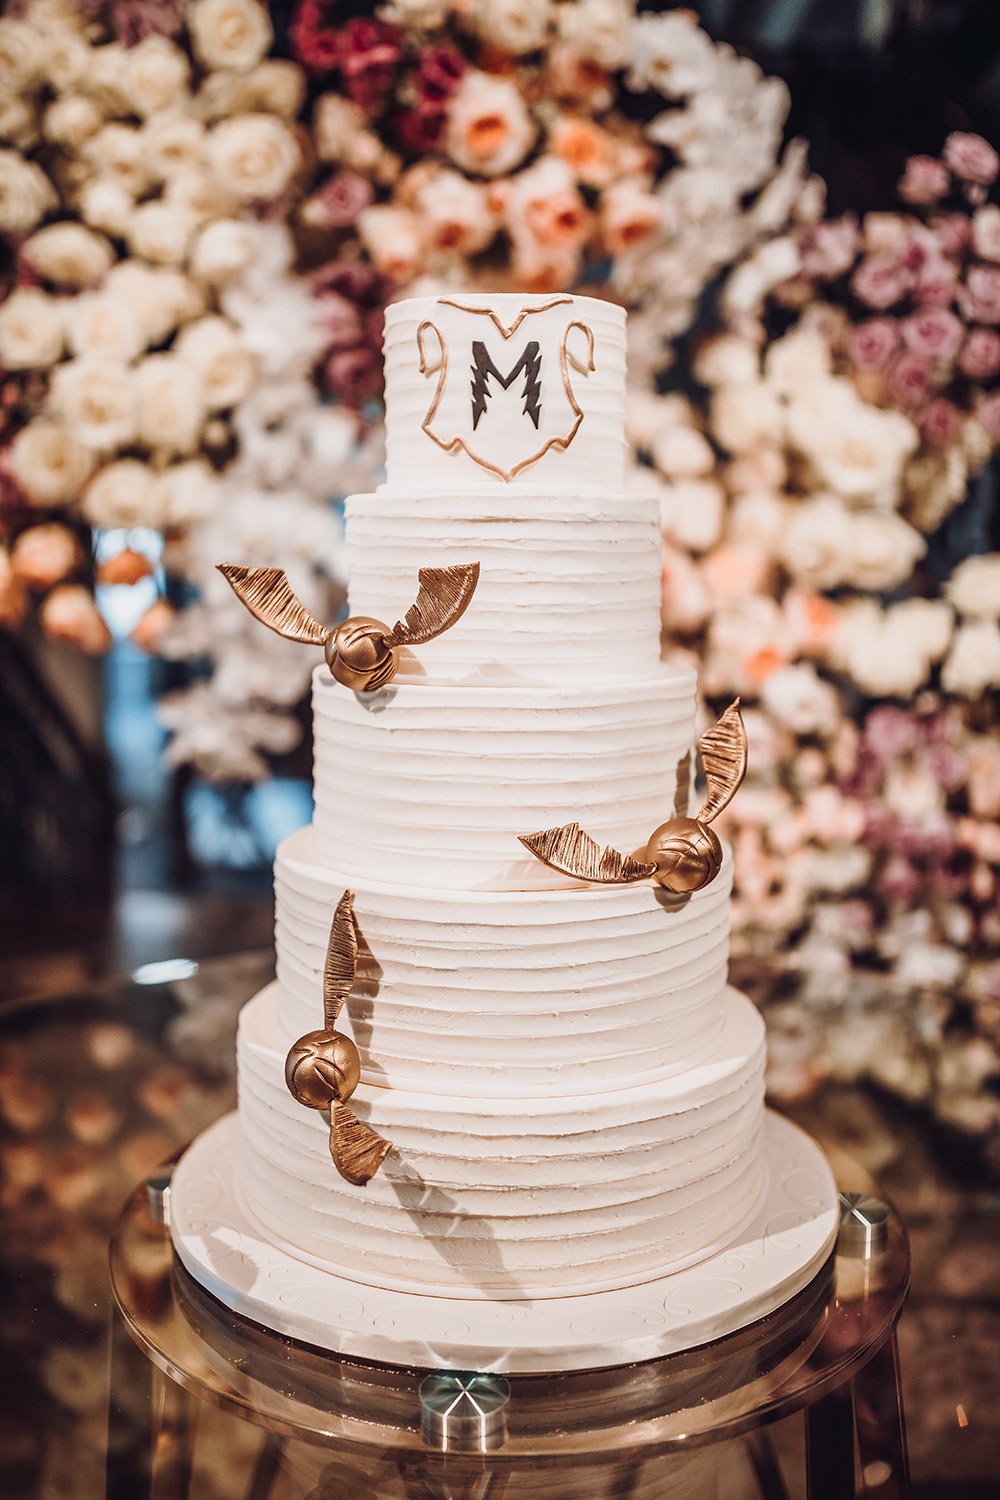 cakes by gina, custom, unique, photography, romantic, reception, snitch, harry potter